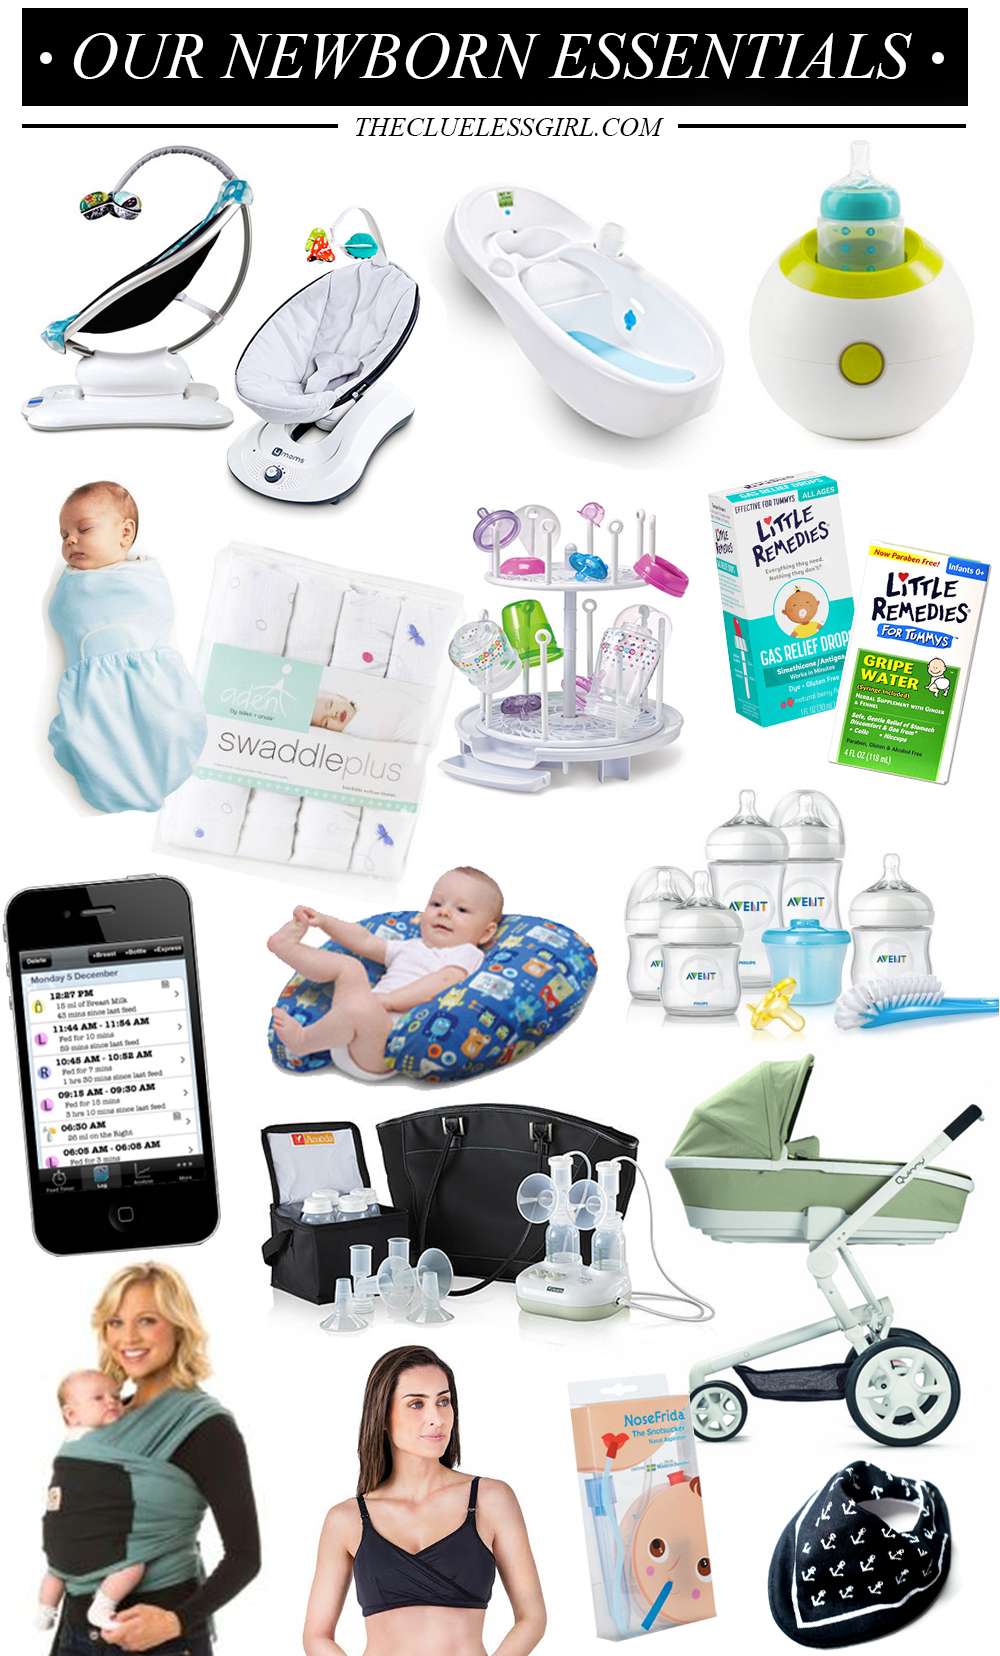 our newborn essentials - the clueless girl's guide